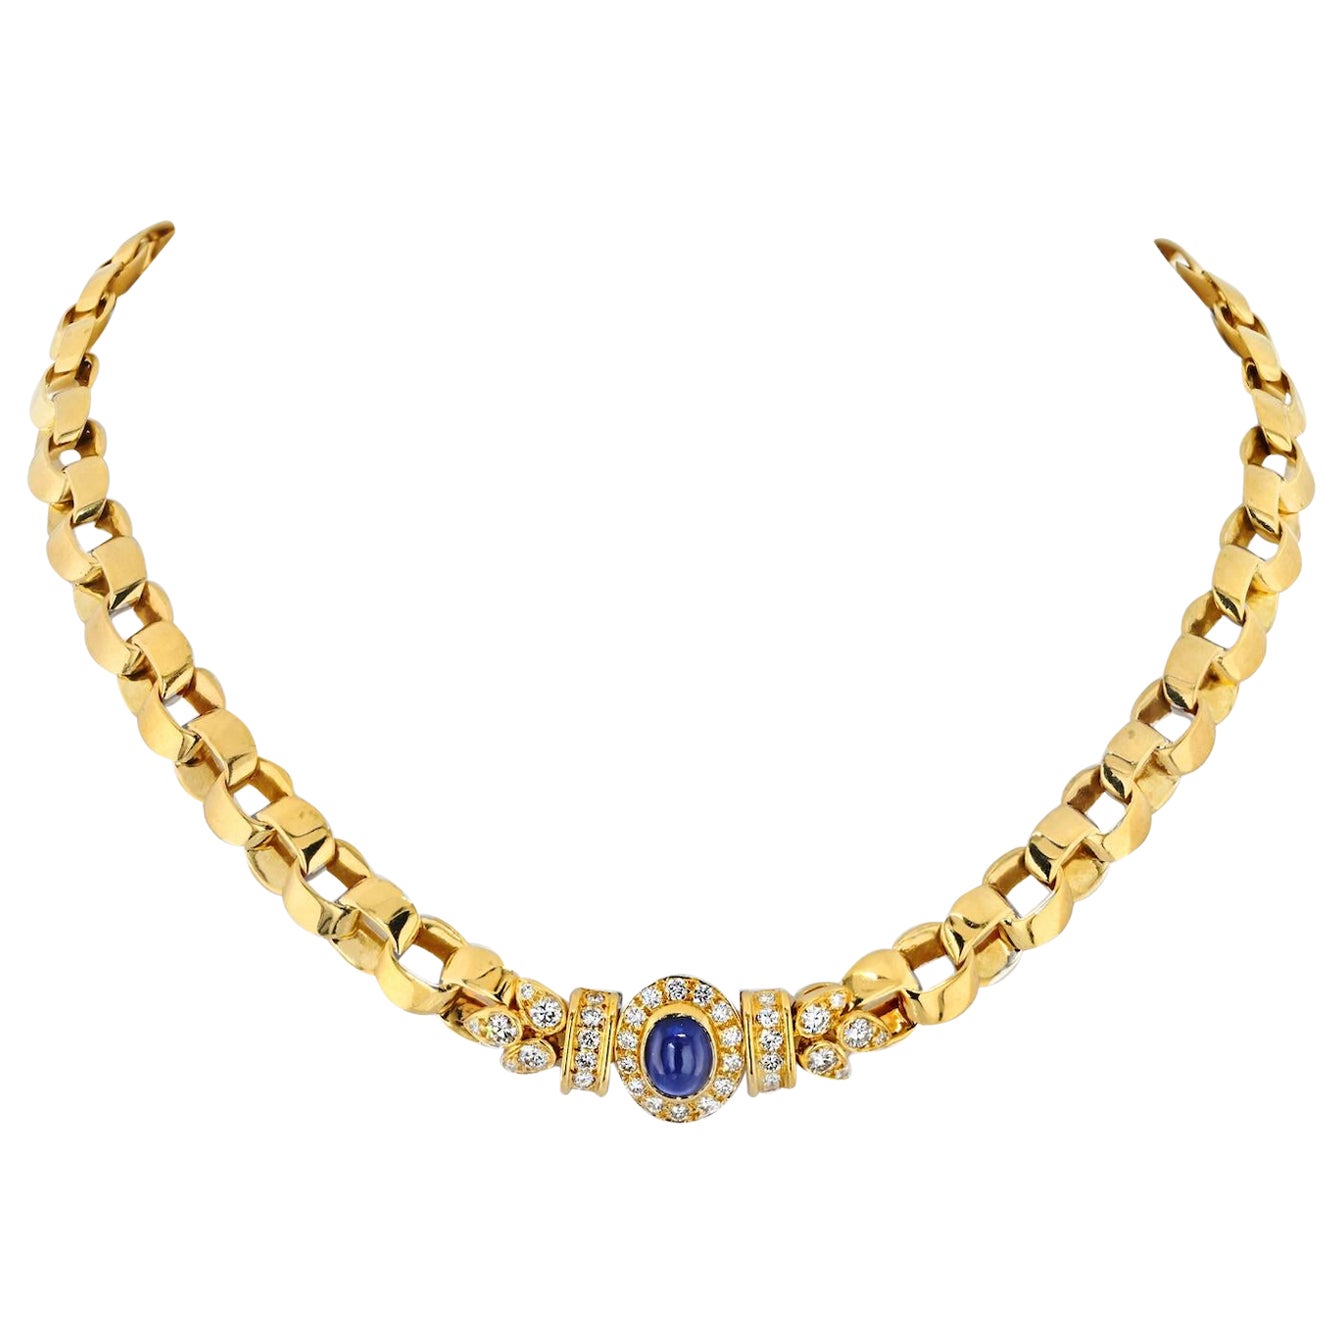 Van Cleef & Arpels 18k Yellow Gold Diamond and Sapphire Curb Link Chain Necklace